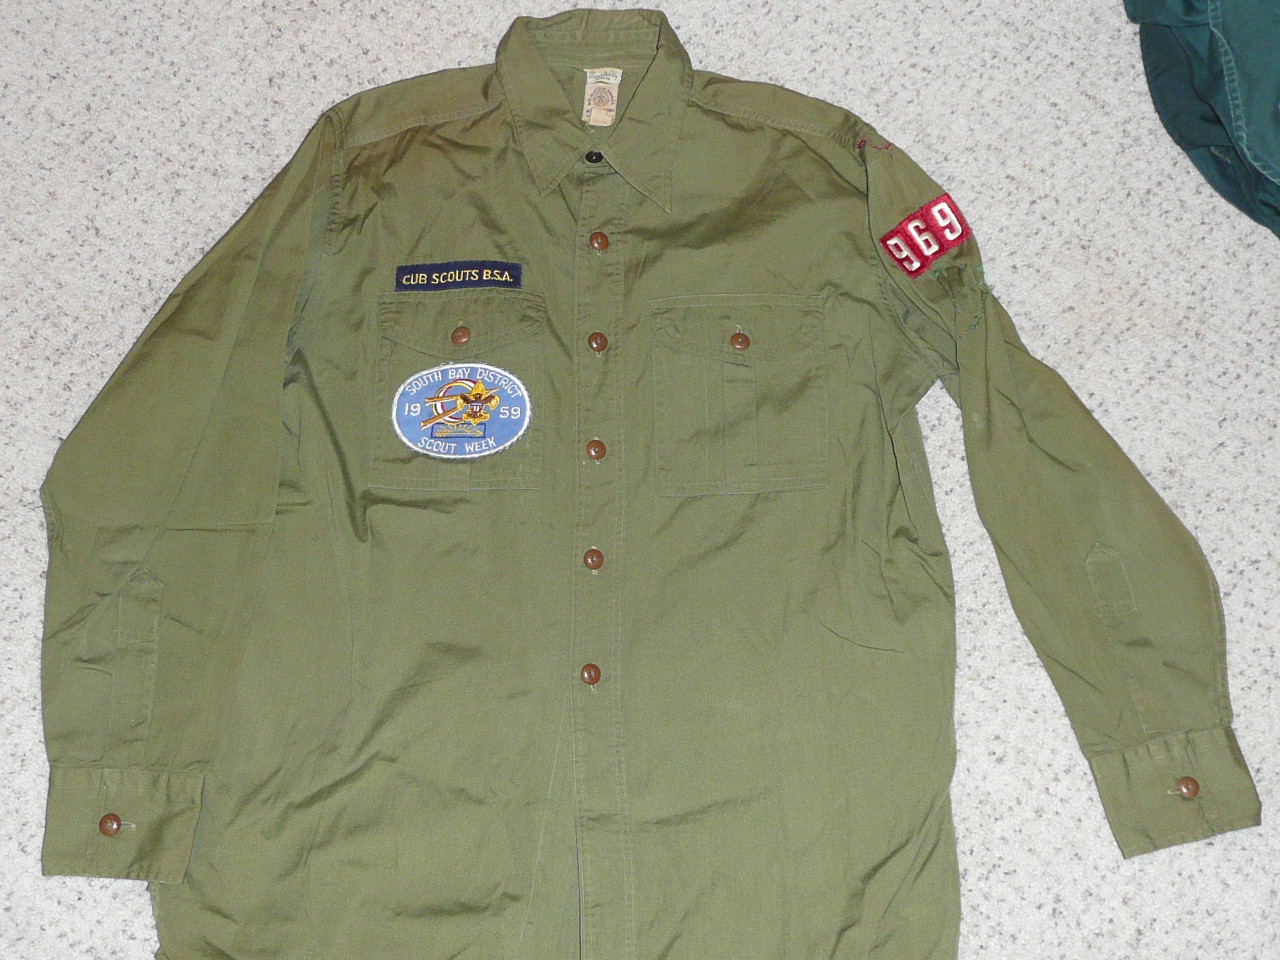 1950's Boy Scout Uniform Shirt with patches from Los Angeles Area Council, Poplin with better buttons, 23" Chest and 31" Length, #FB14